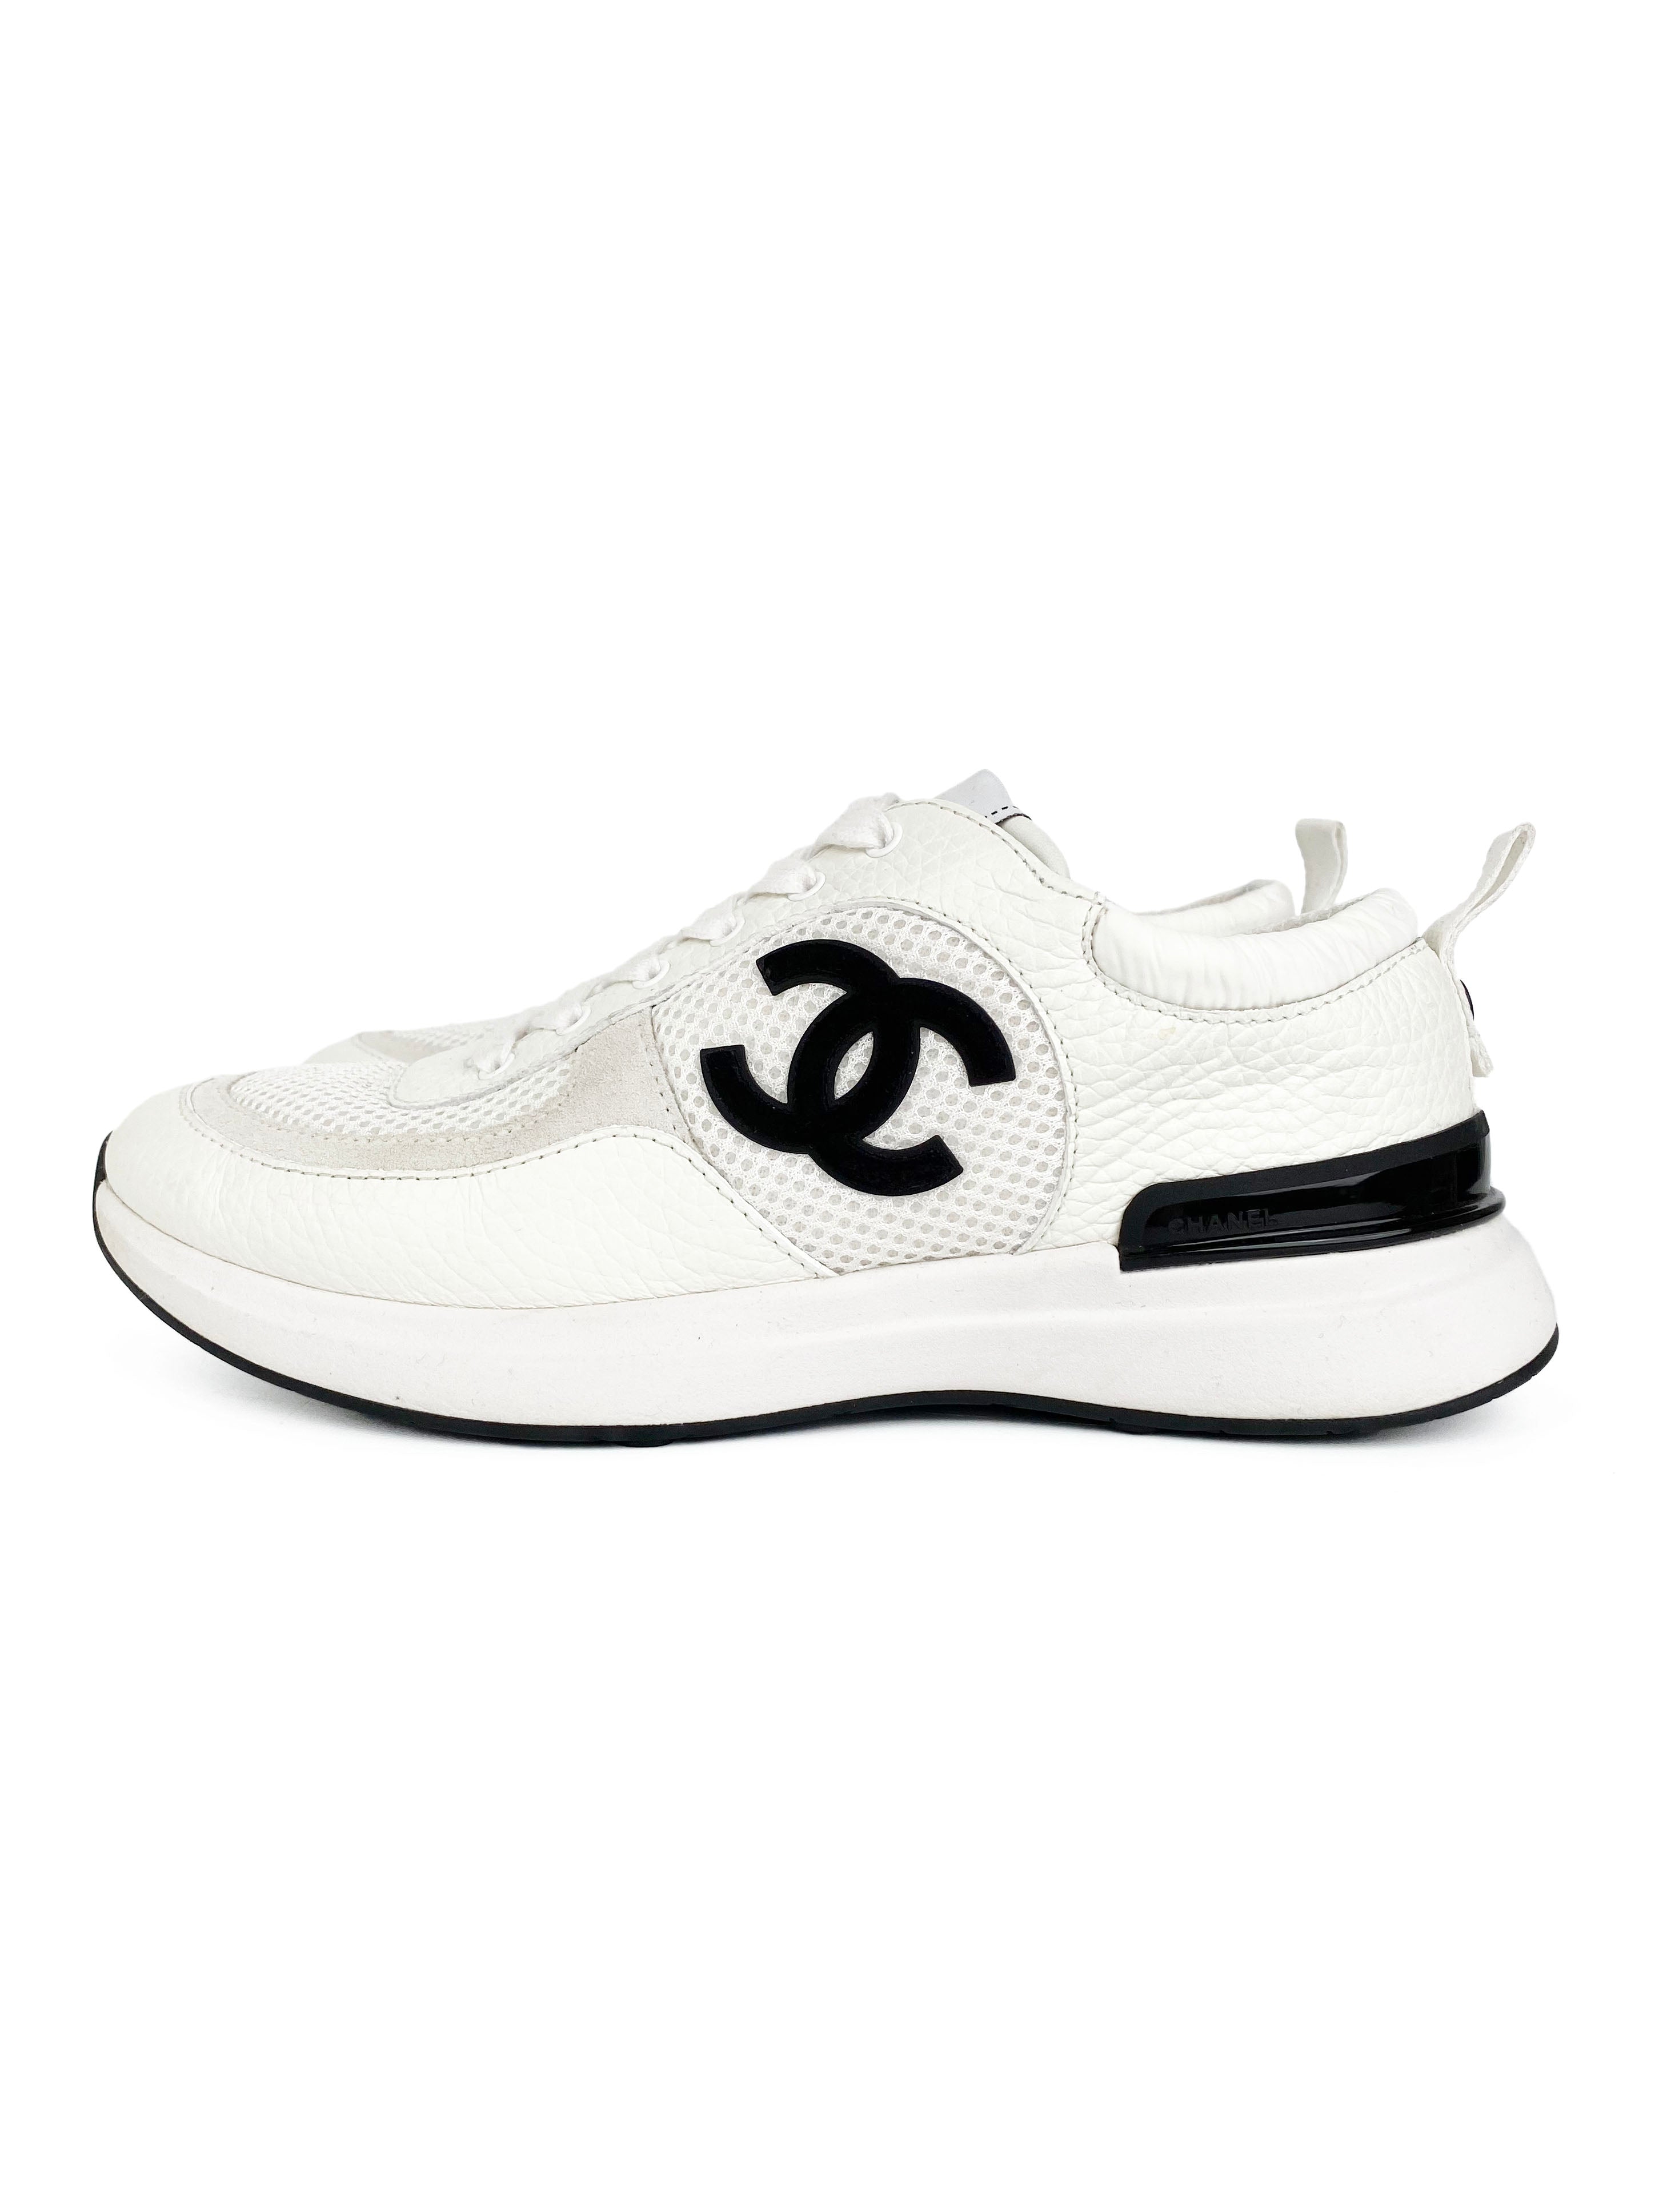 Chanel White CC Sneakers 38.5